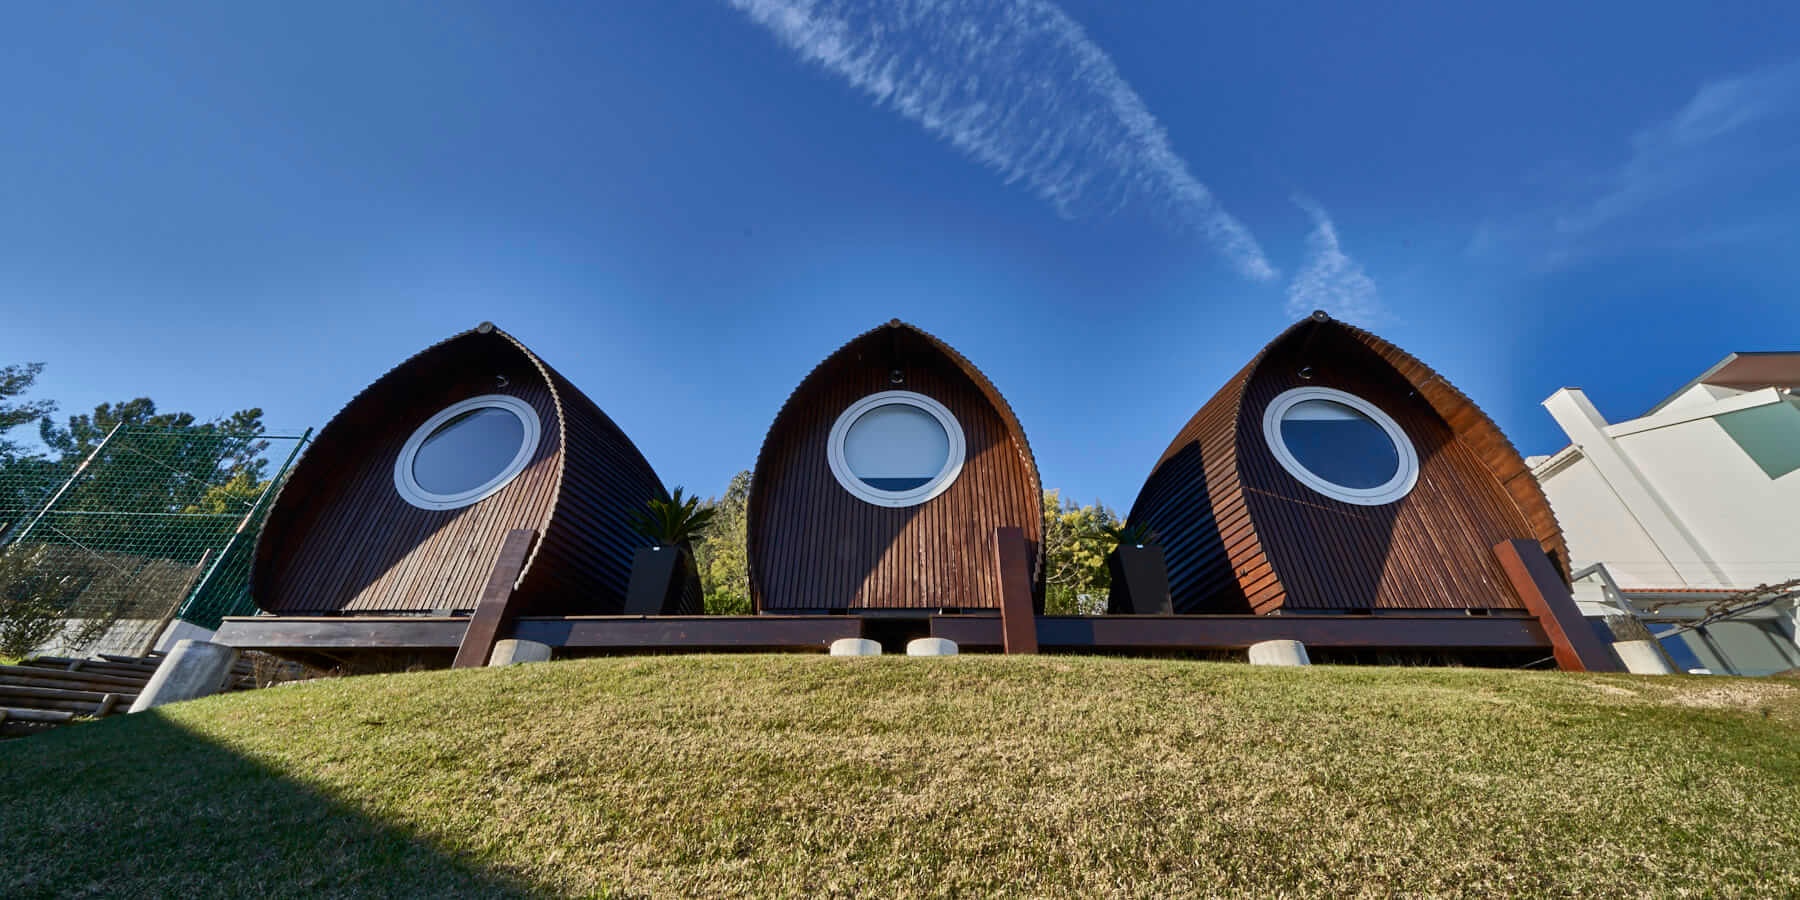 A view of the Eco Pods